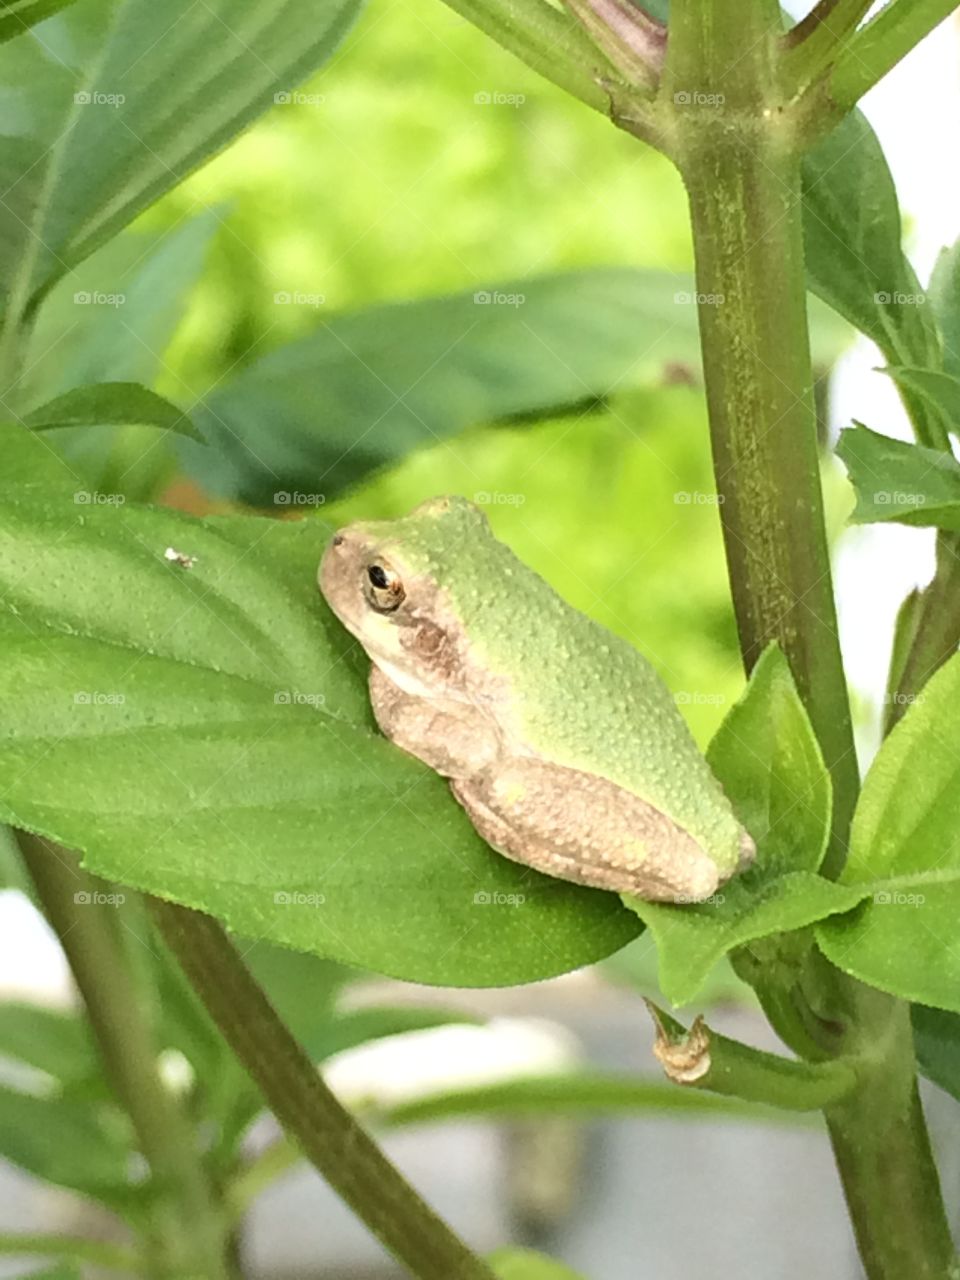 Tree frog. This is such a cute baby tree frog. I caught him sitting on my basil plant. No bigger than a nickel.